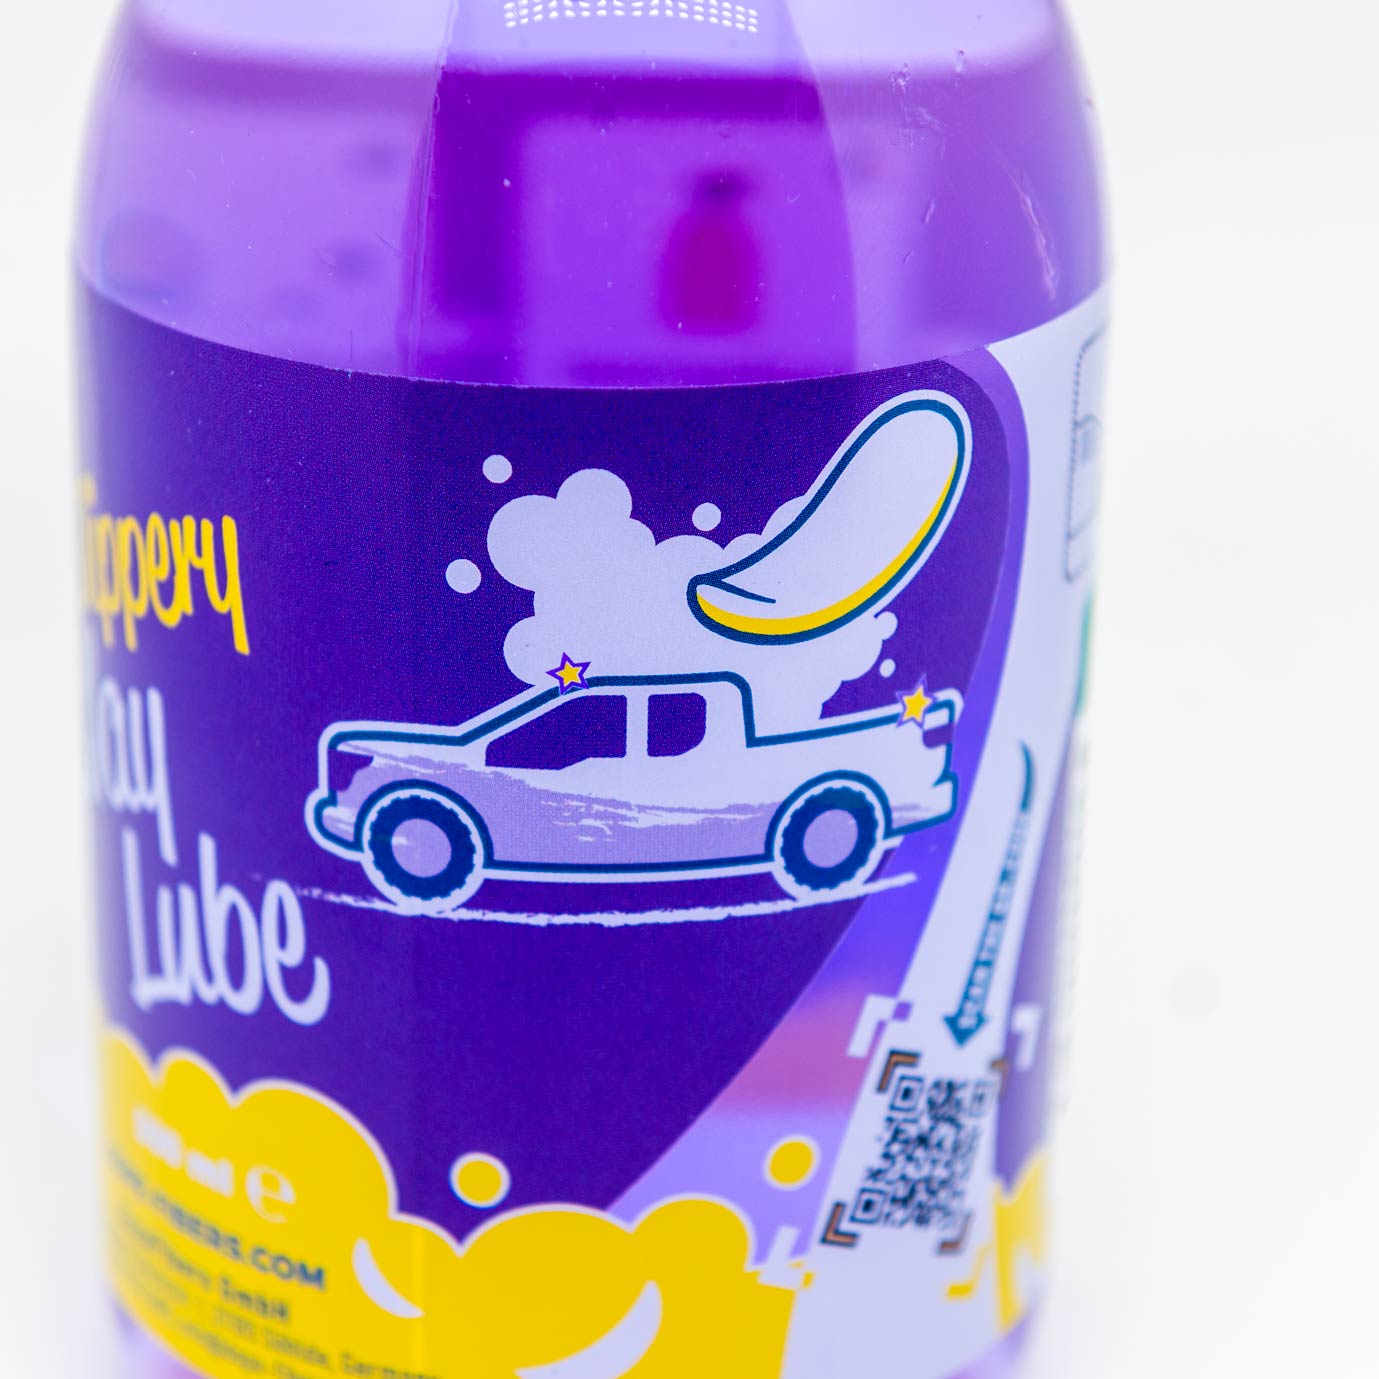 DopeFibers - Slippery Clay Lube - Car-Care.it Detailing